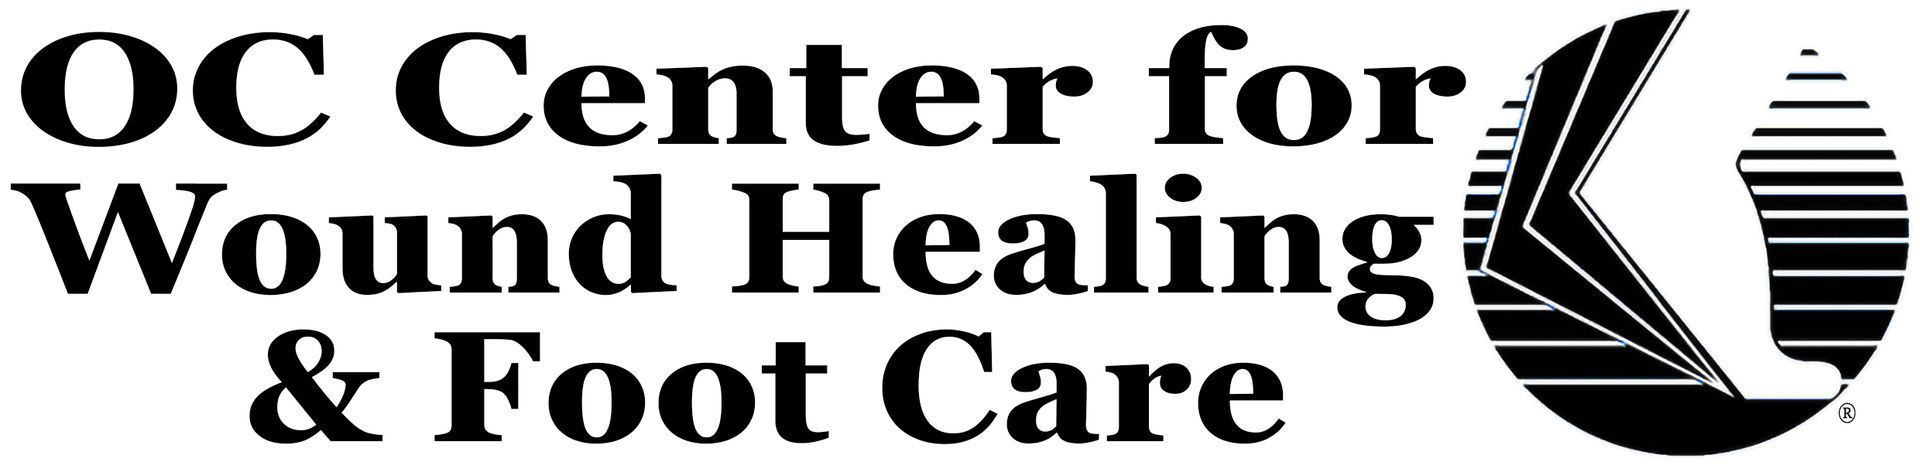 OC Center for Wound Healing & Foot Care -- Dr. Mark Reed  - USC / UCSF 